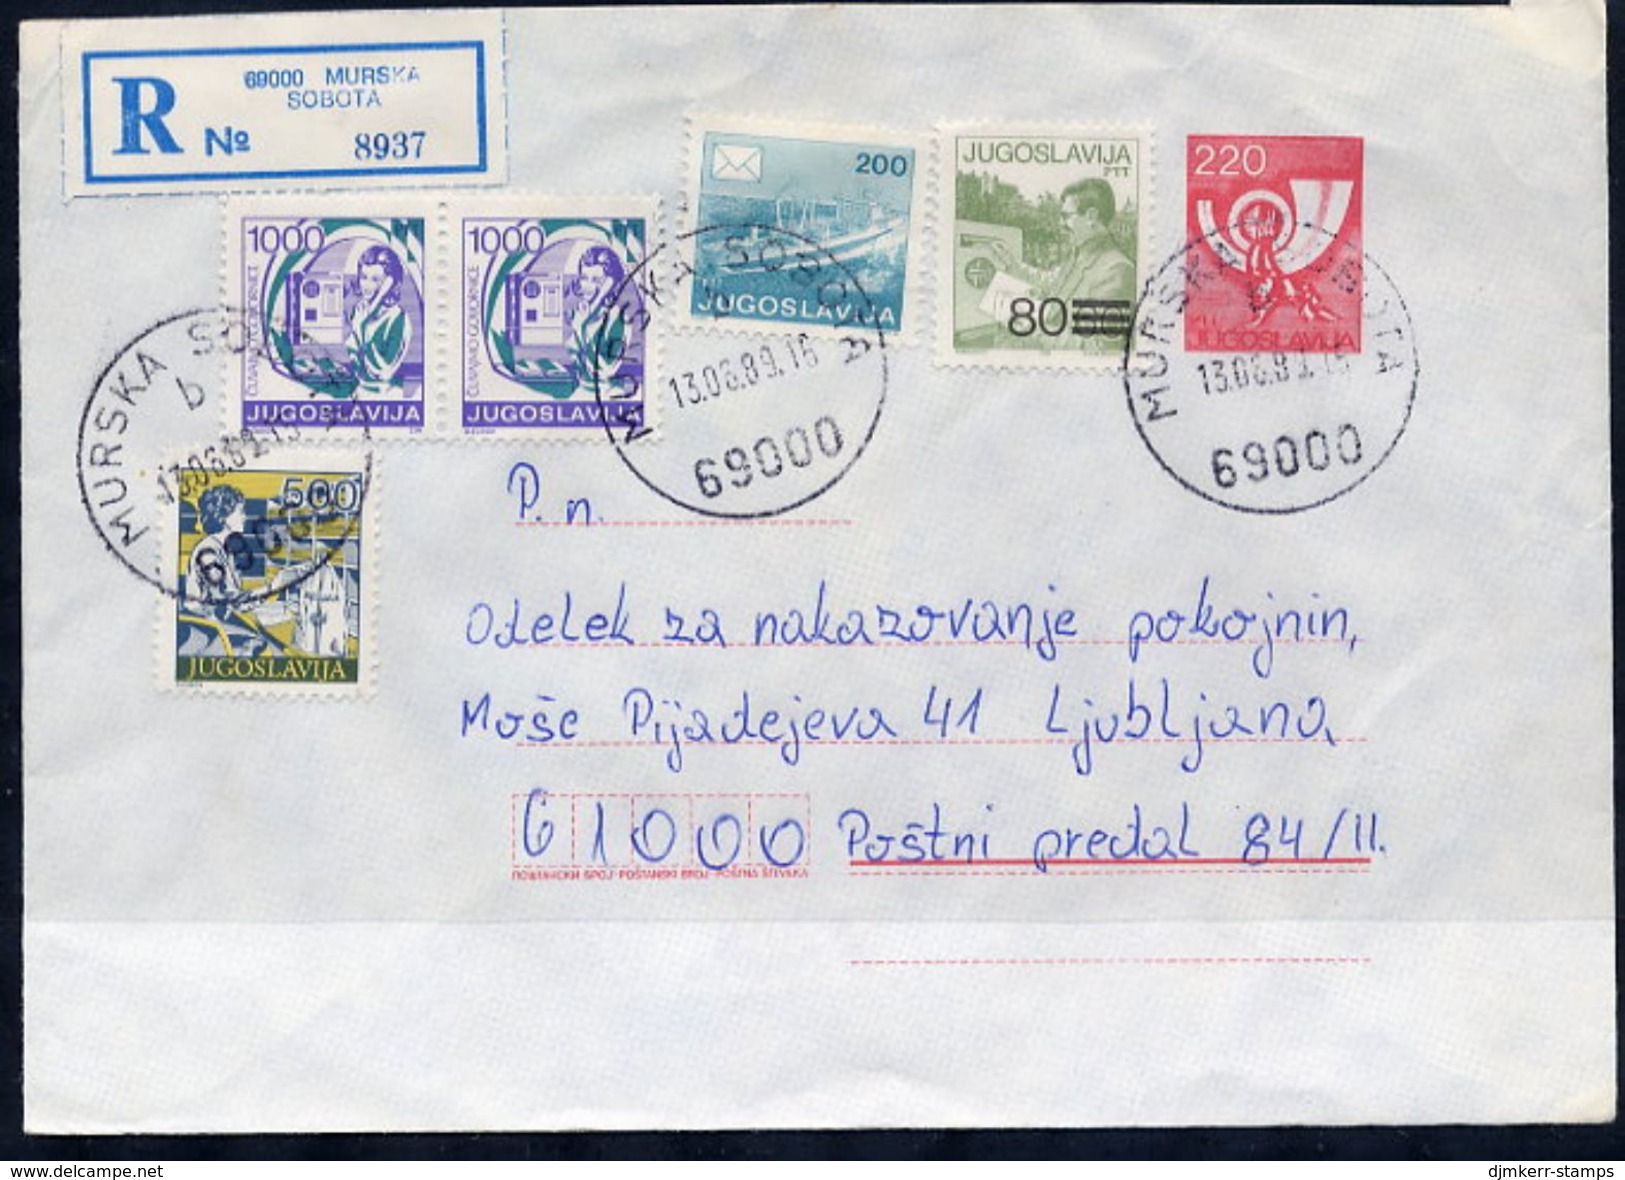 YUGOSLAVIA 1988 Posthorn 220 D. Registered Stationery Envelope Used With Additional Franking.  Michel U83 - Entiers Postaux